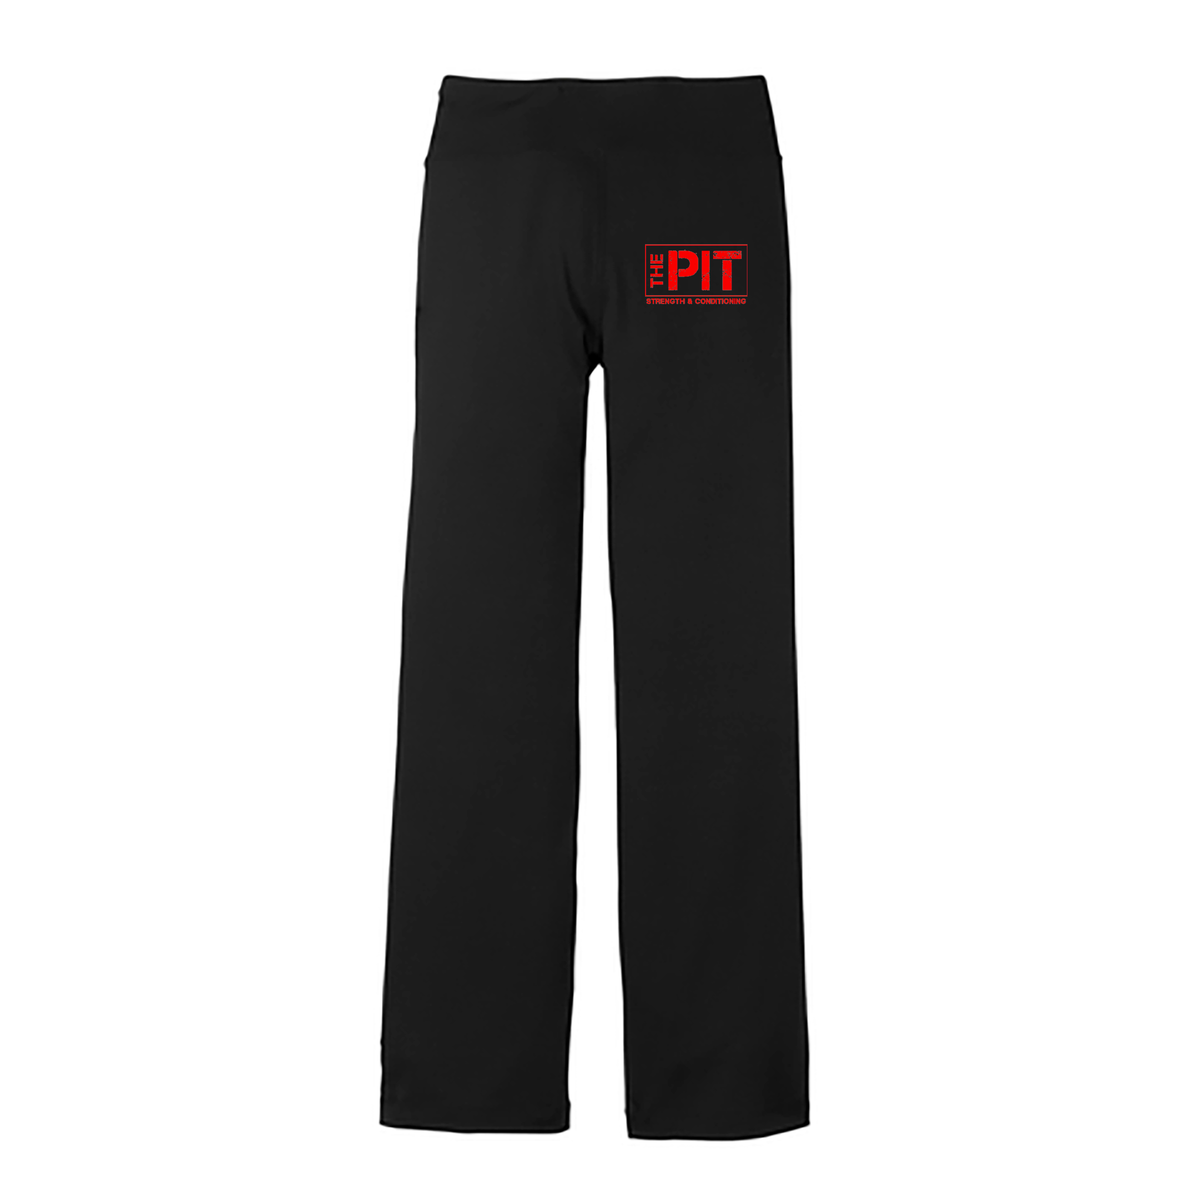 The Pit Ladies Fitness Pant